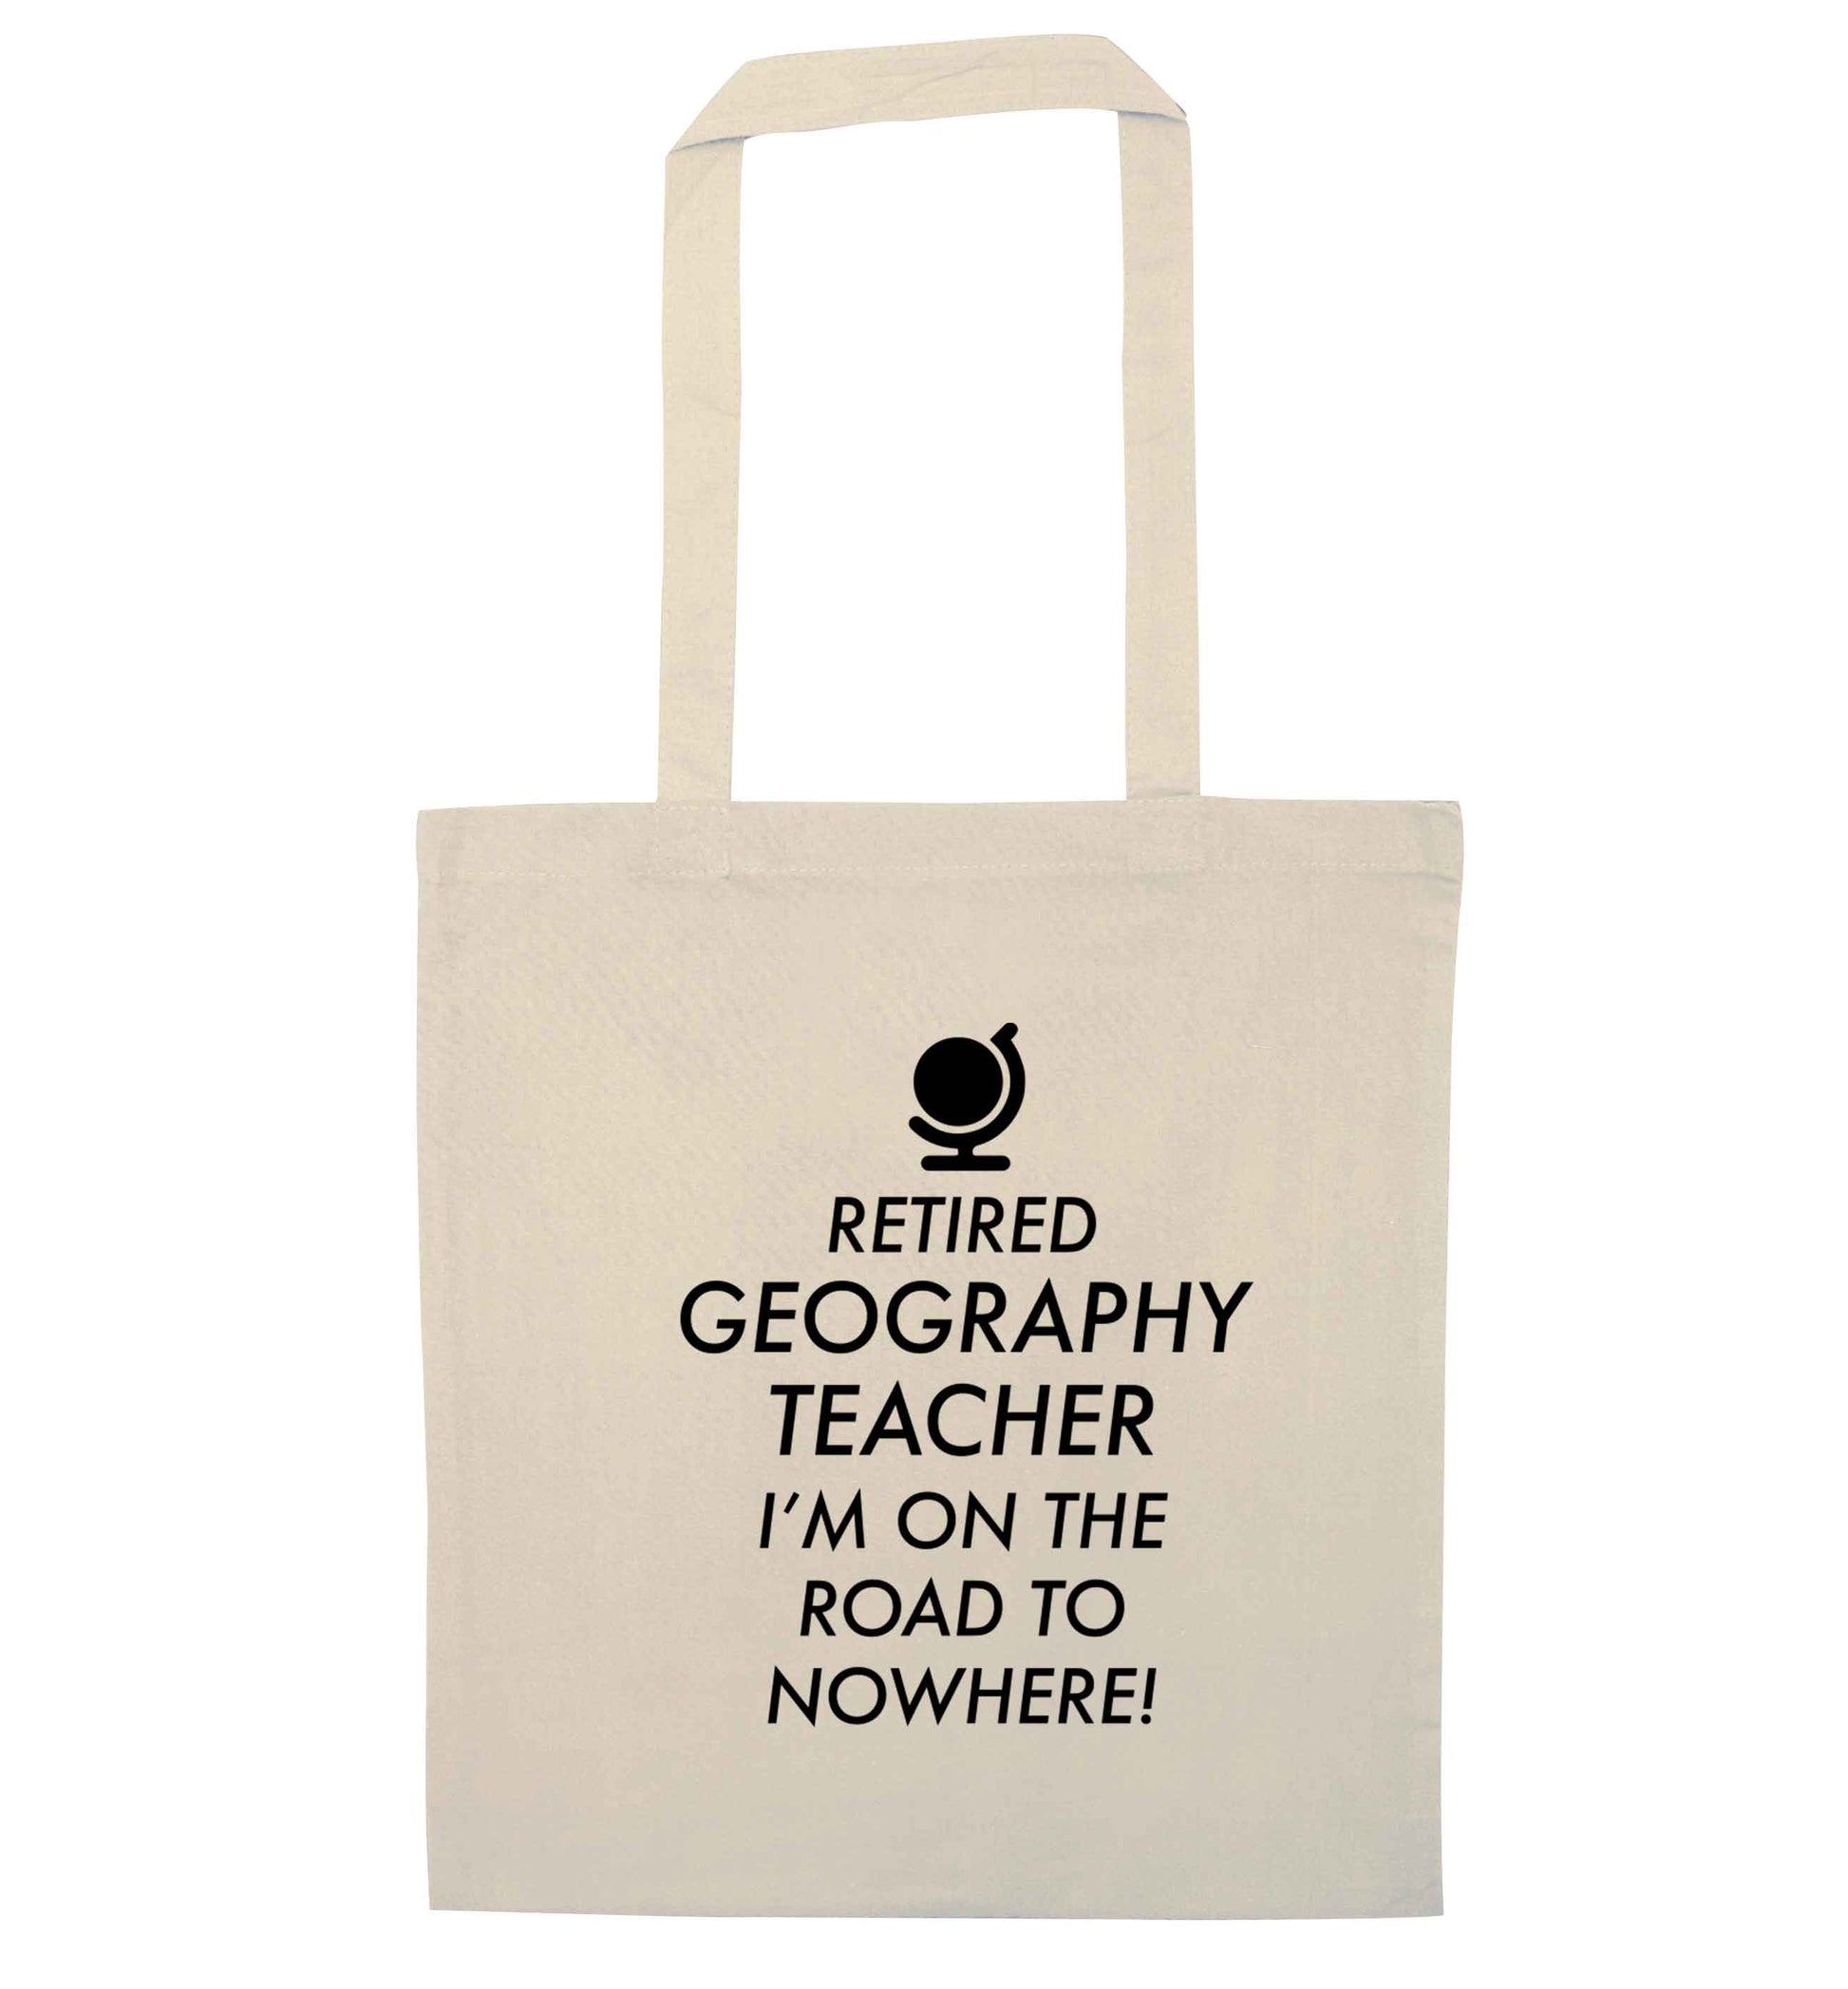 Retired geography teacher I'm on the road to nowhere natural tote bag